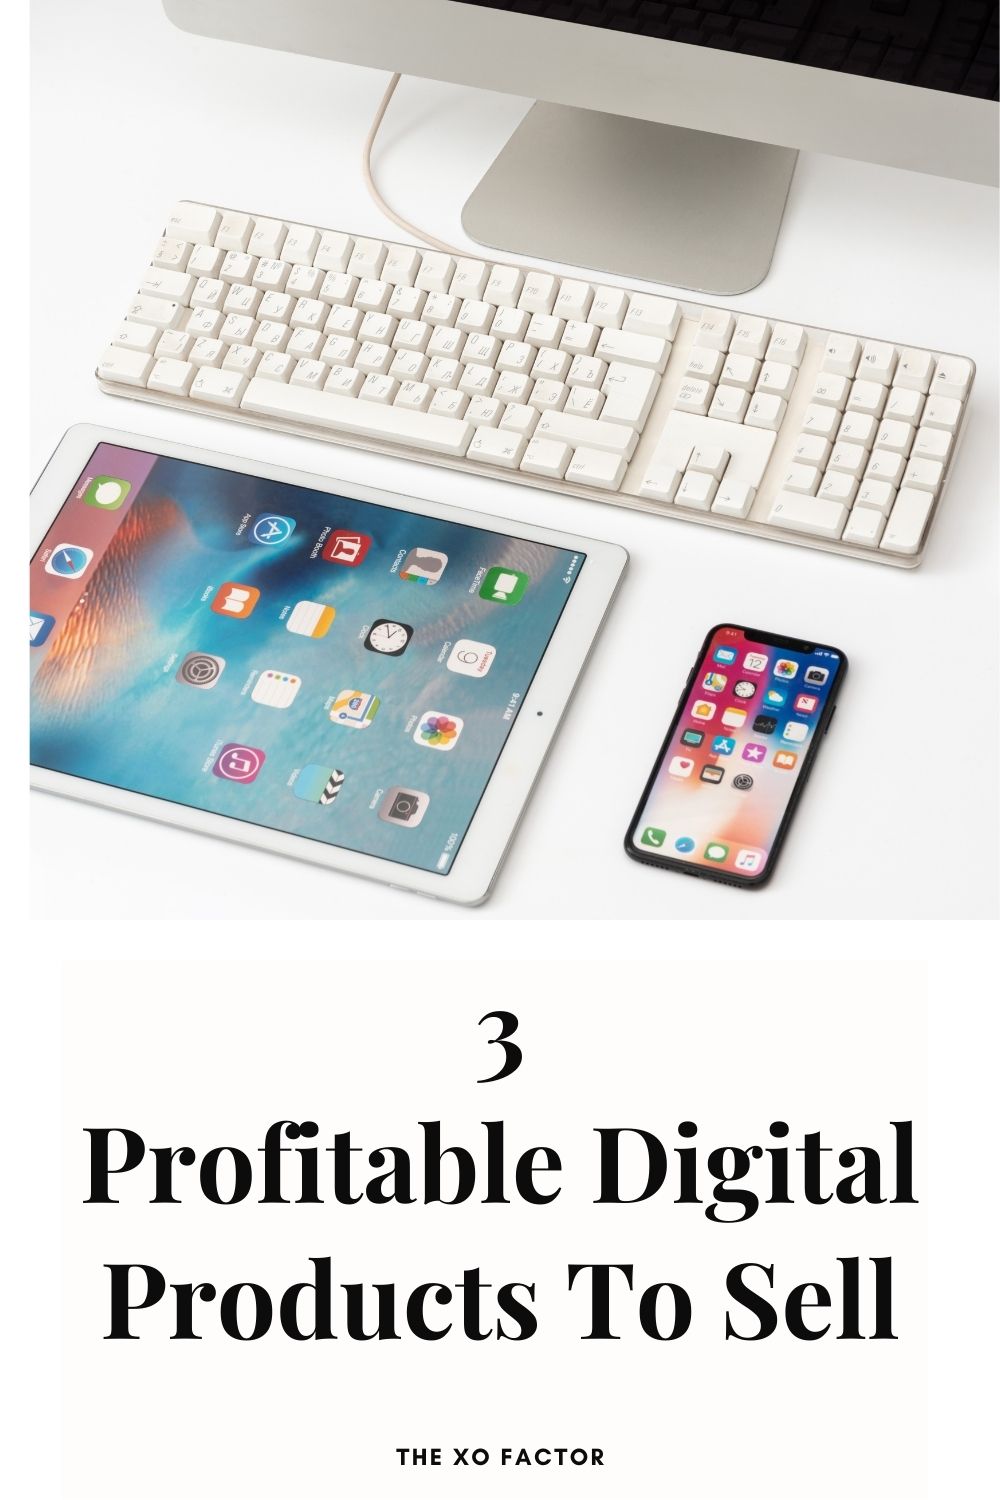 Profitable Digital Products To Sell